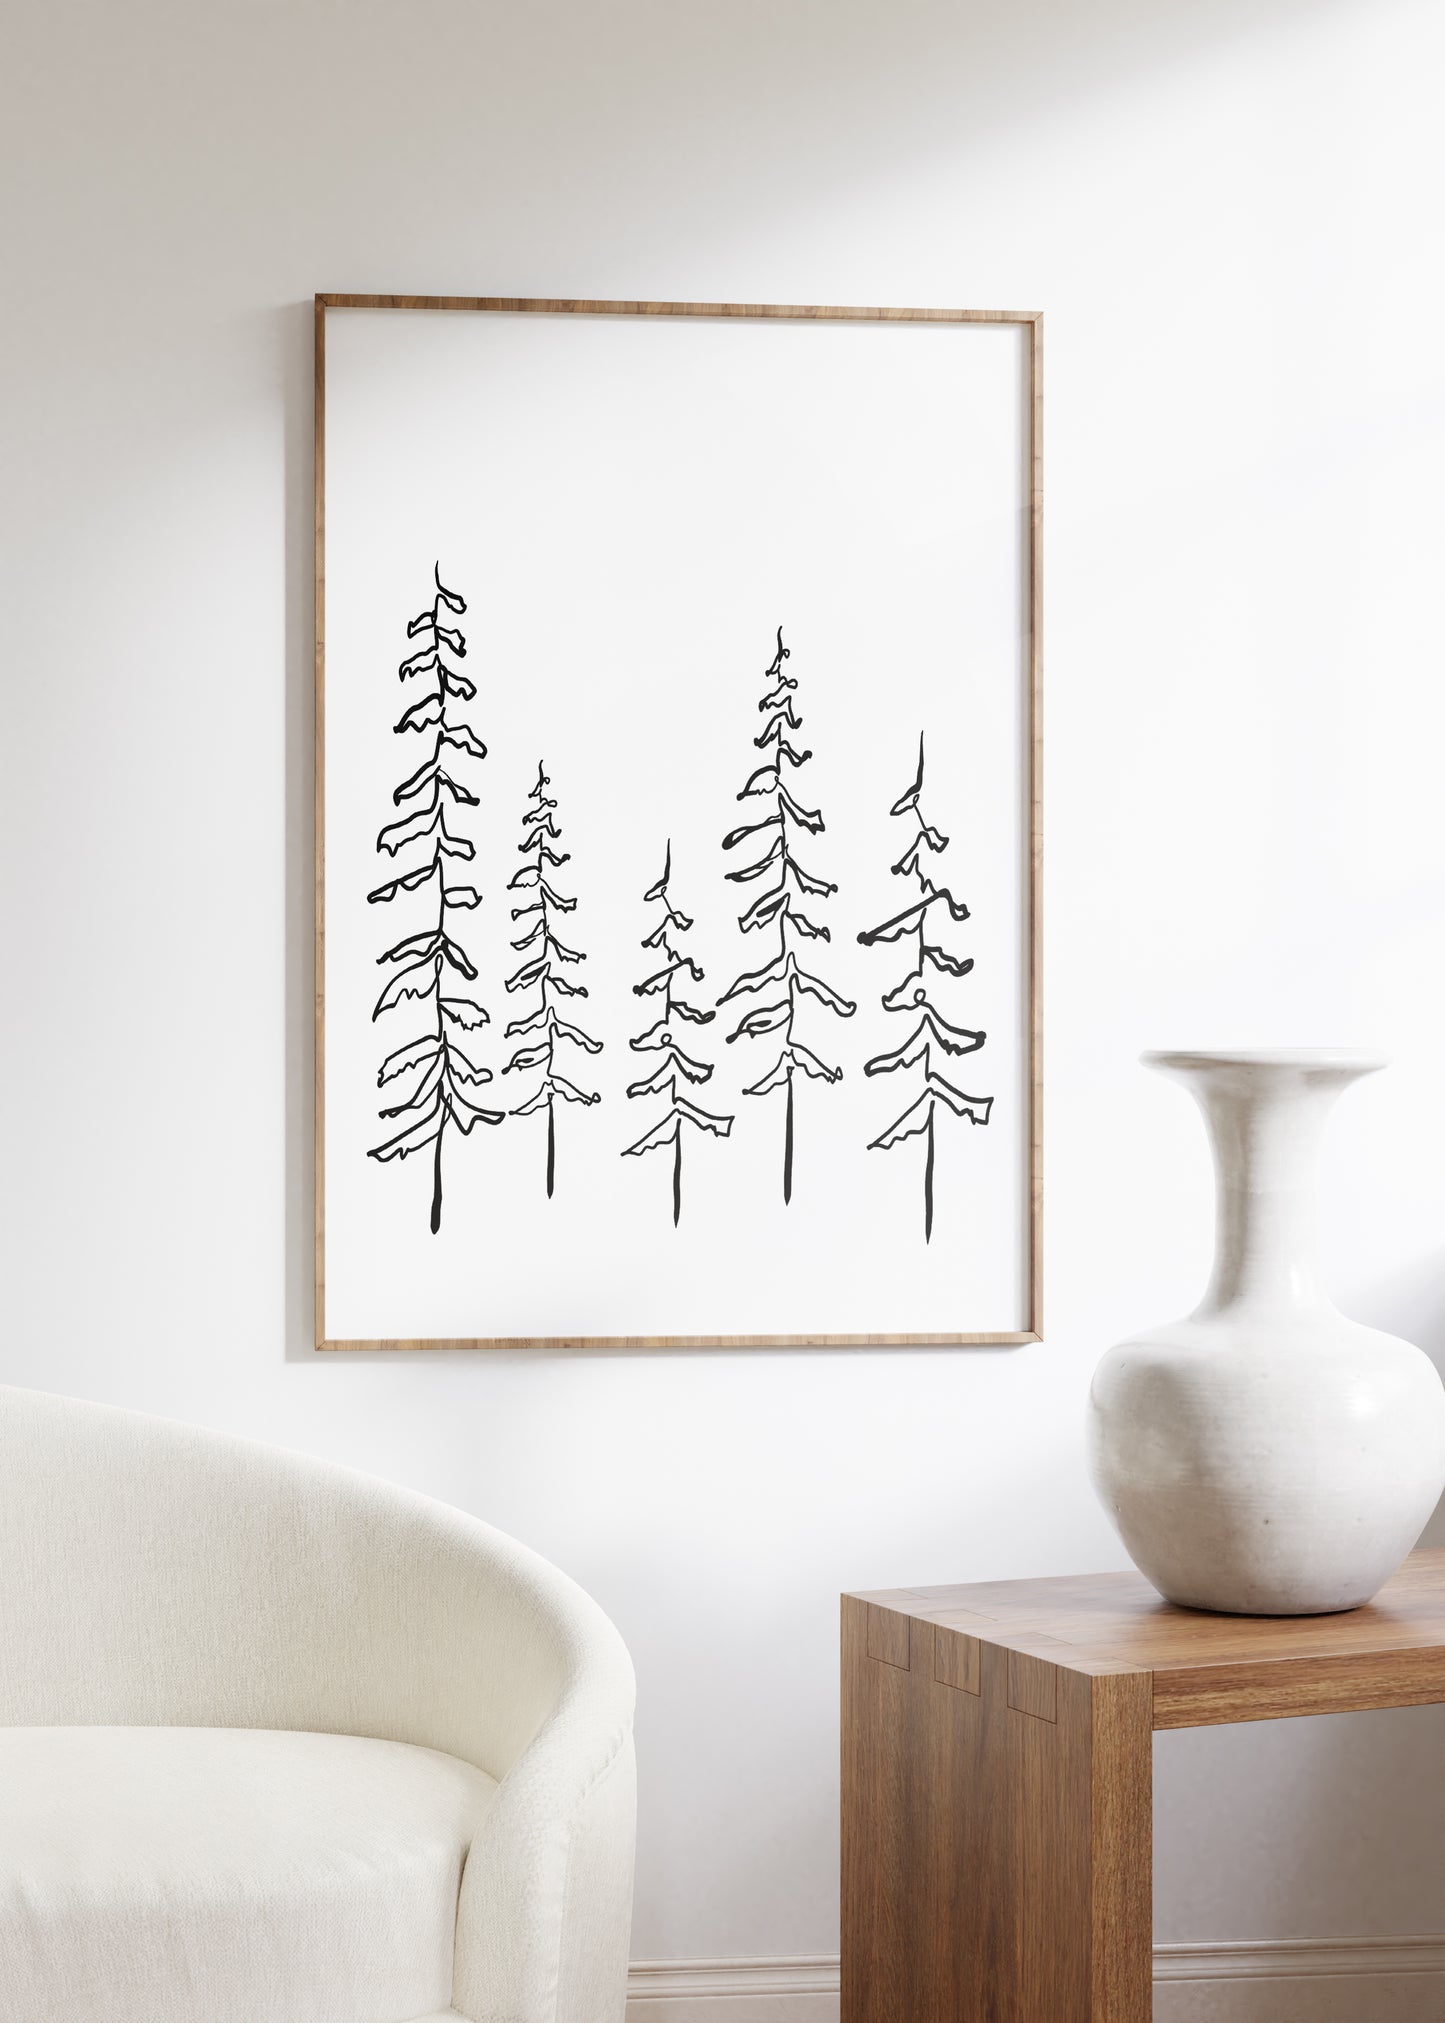 one line tree drawing framed in a wood frame in living room decor